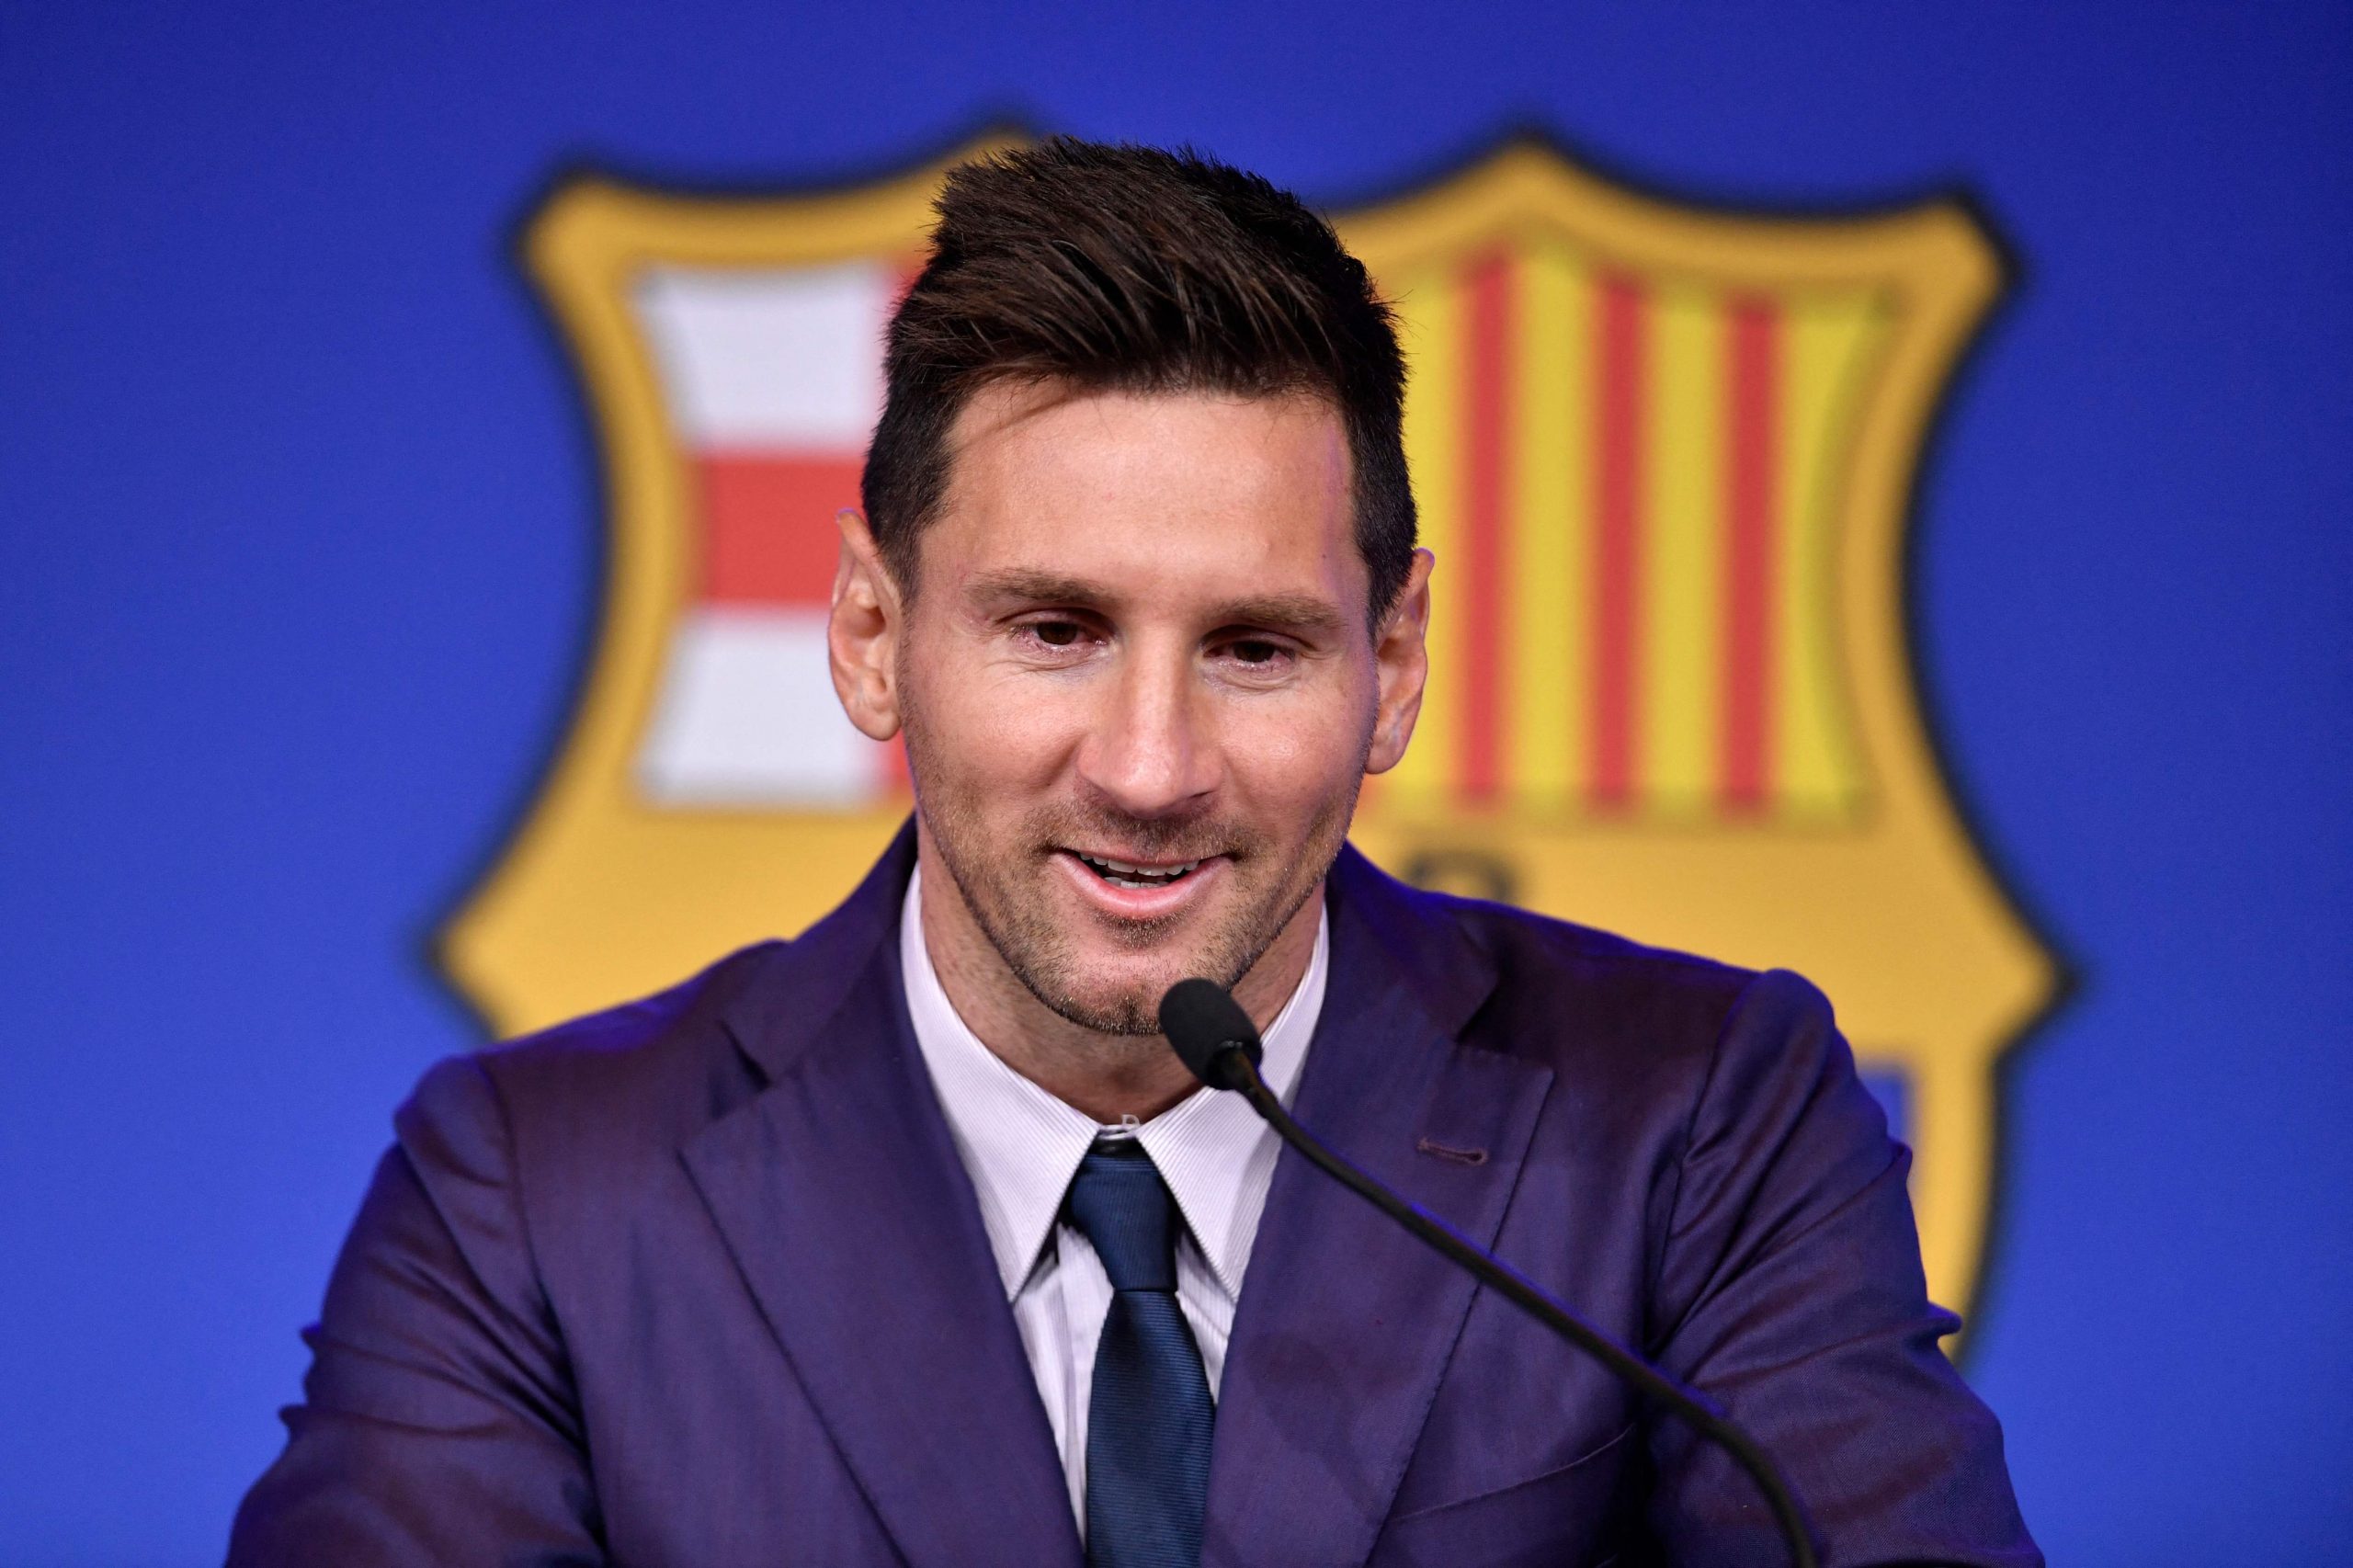 Lionel Messi reaches agreement on move to PSG